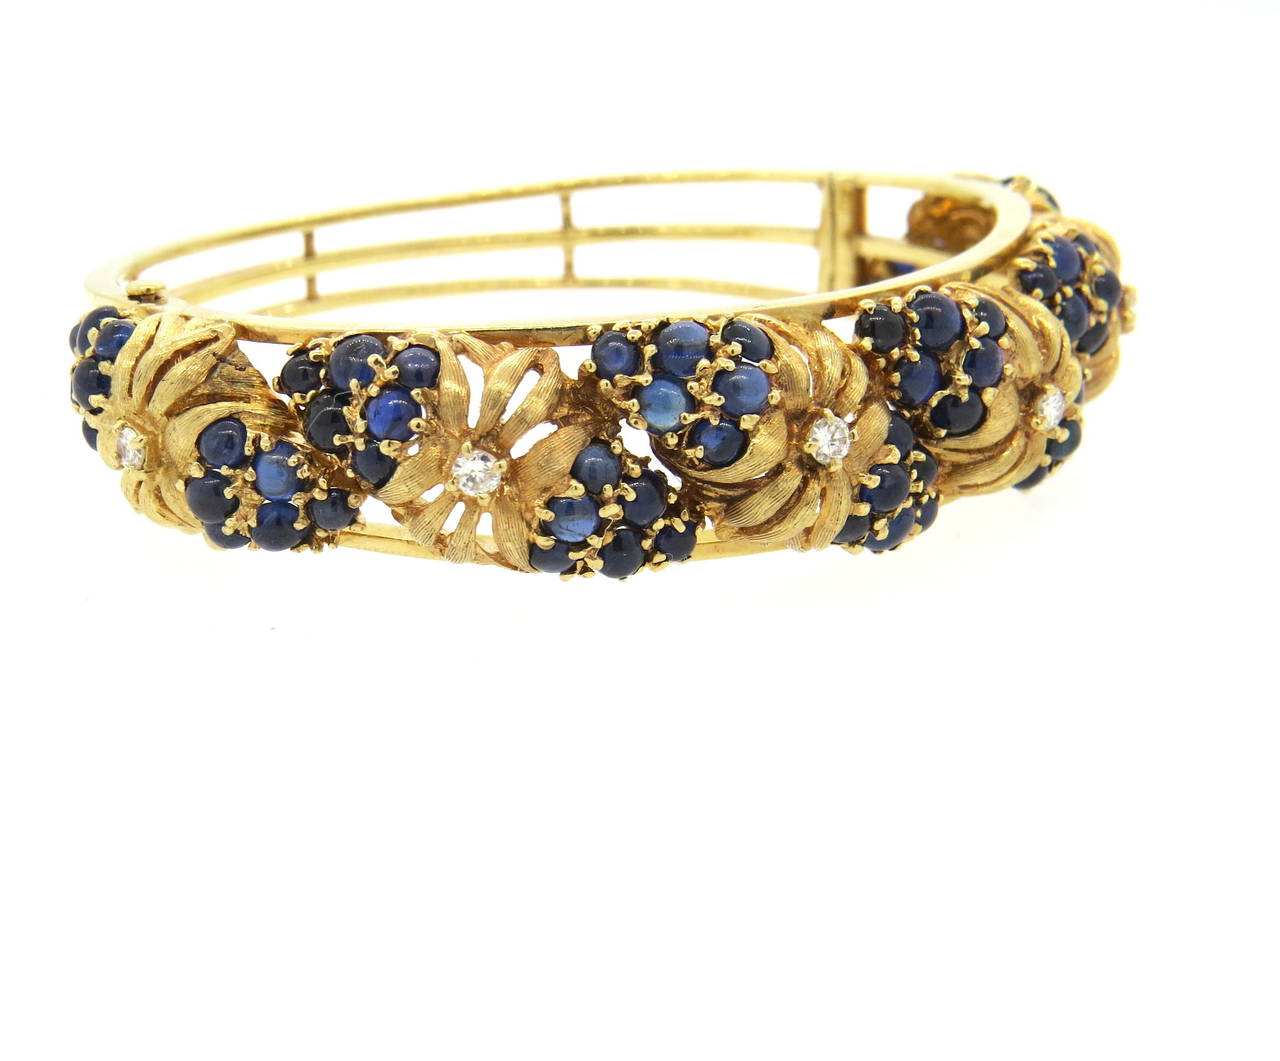 Mid century 14k gold bangle bracelet, set with blue sapphire cabochons and approx. 0.30ctw in diamonds , organized in floral design. Bracelet will fit up to 7 1/2